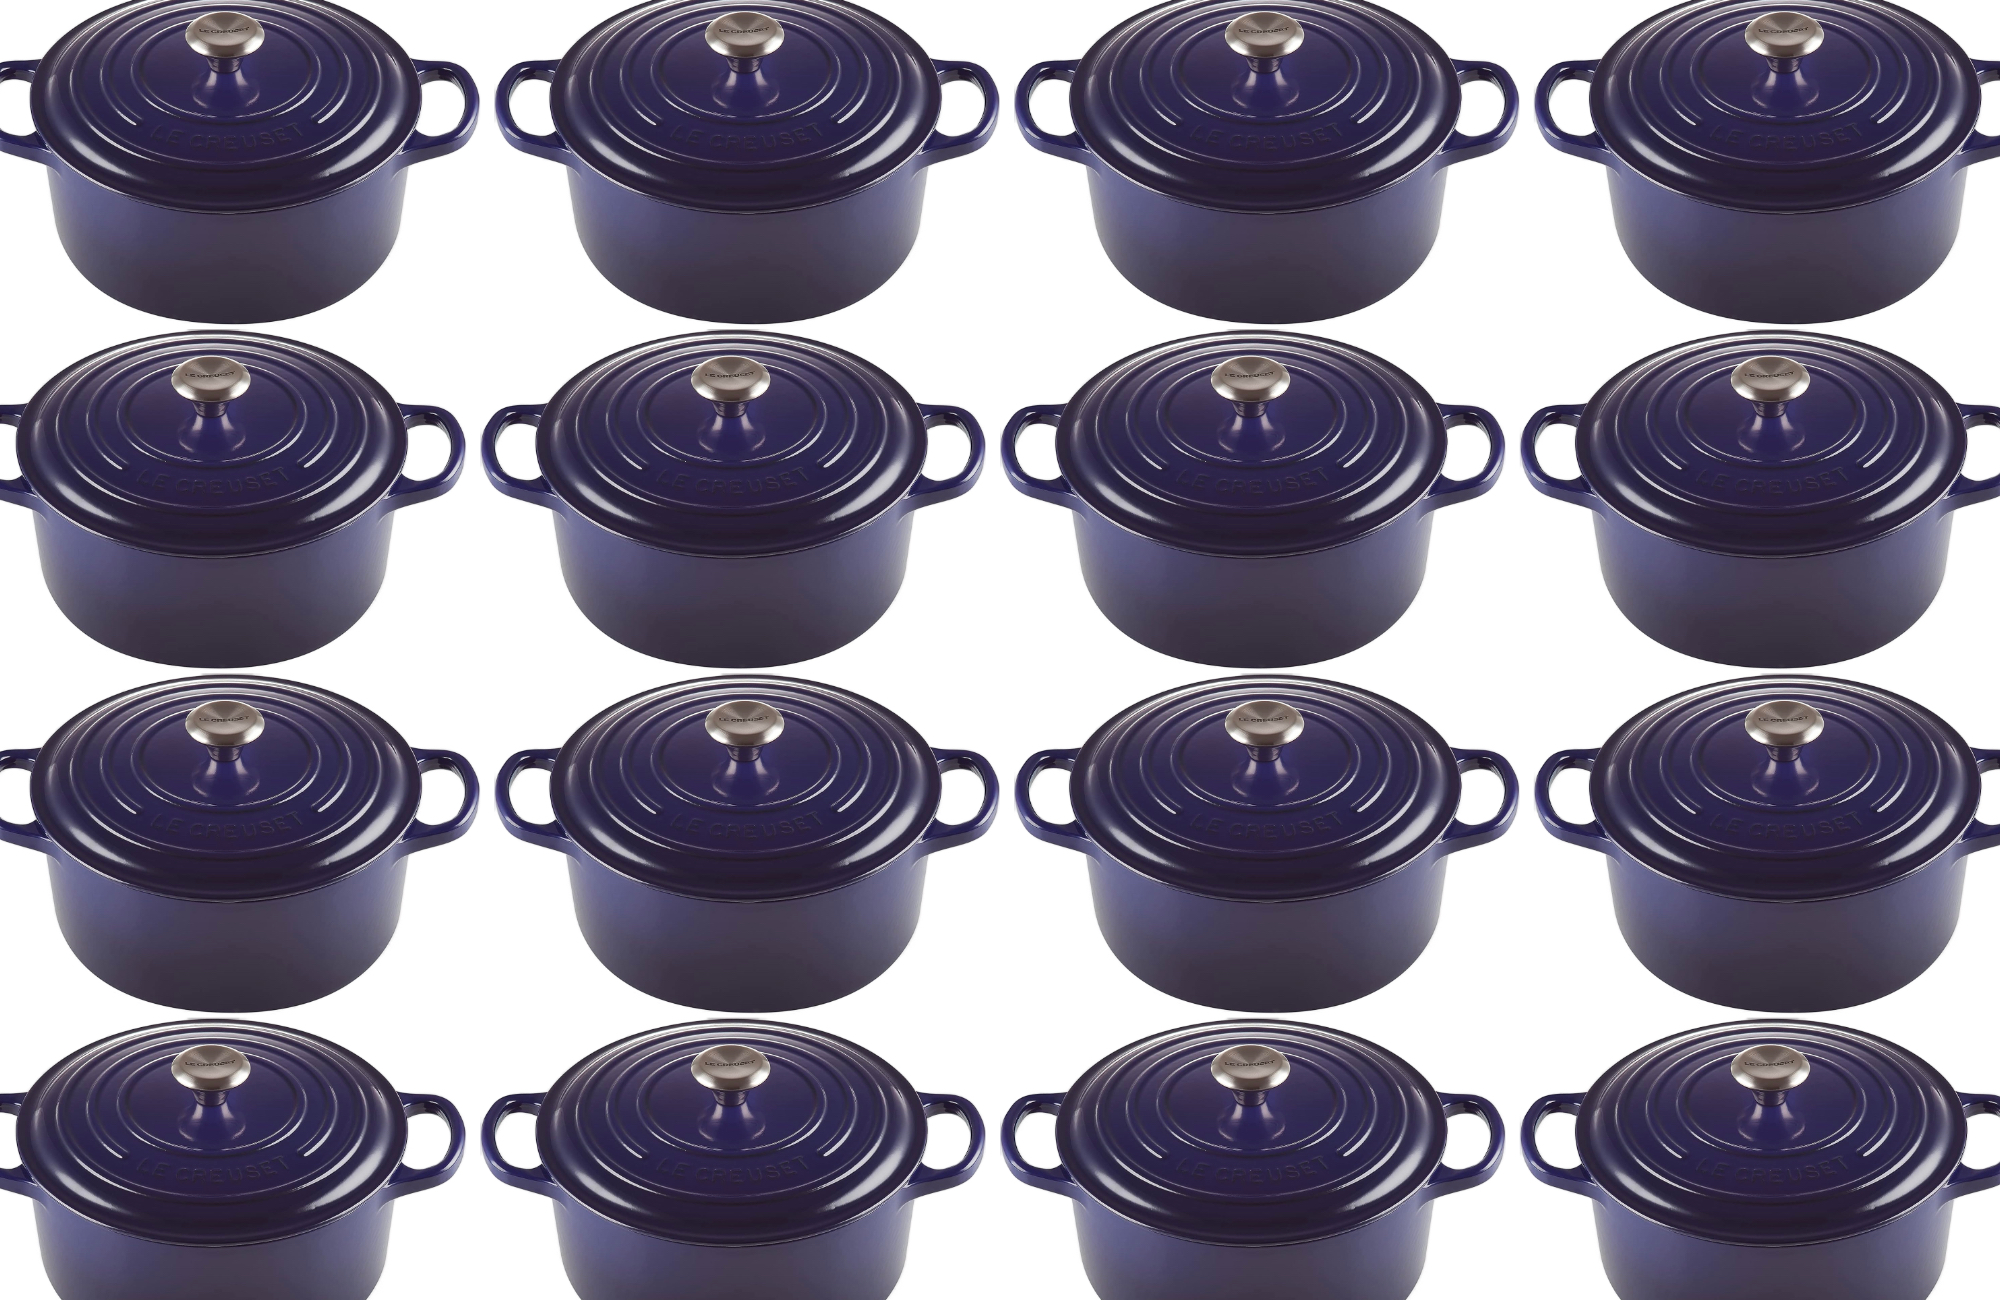 50+ sizzling Black Friday cookware deals you can get right now